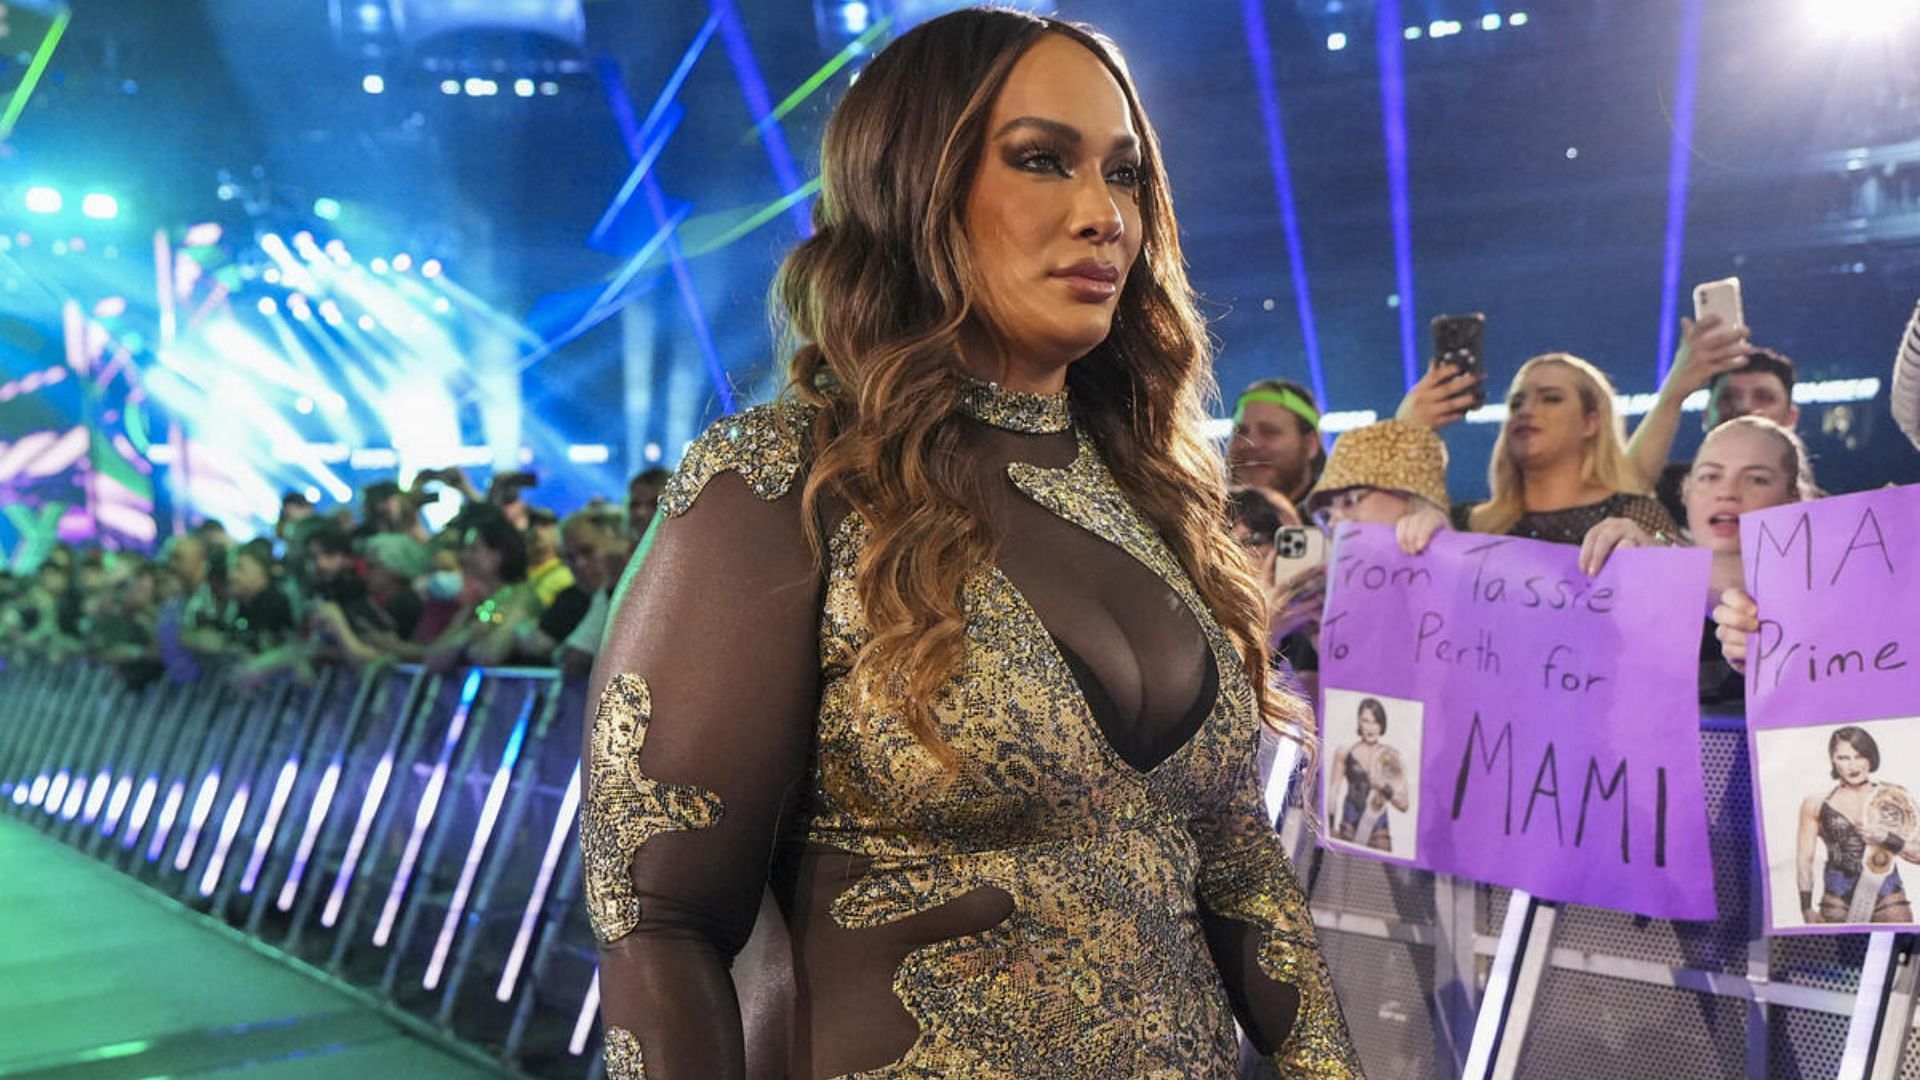 Who will Nia Jax tussle with next?